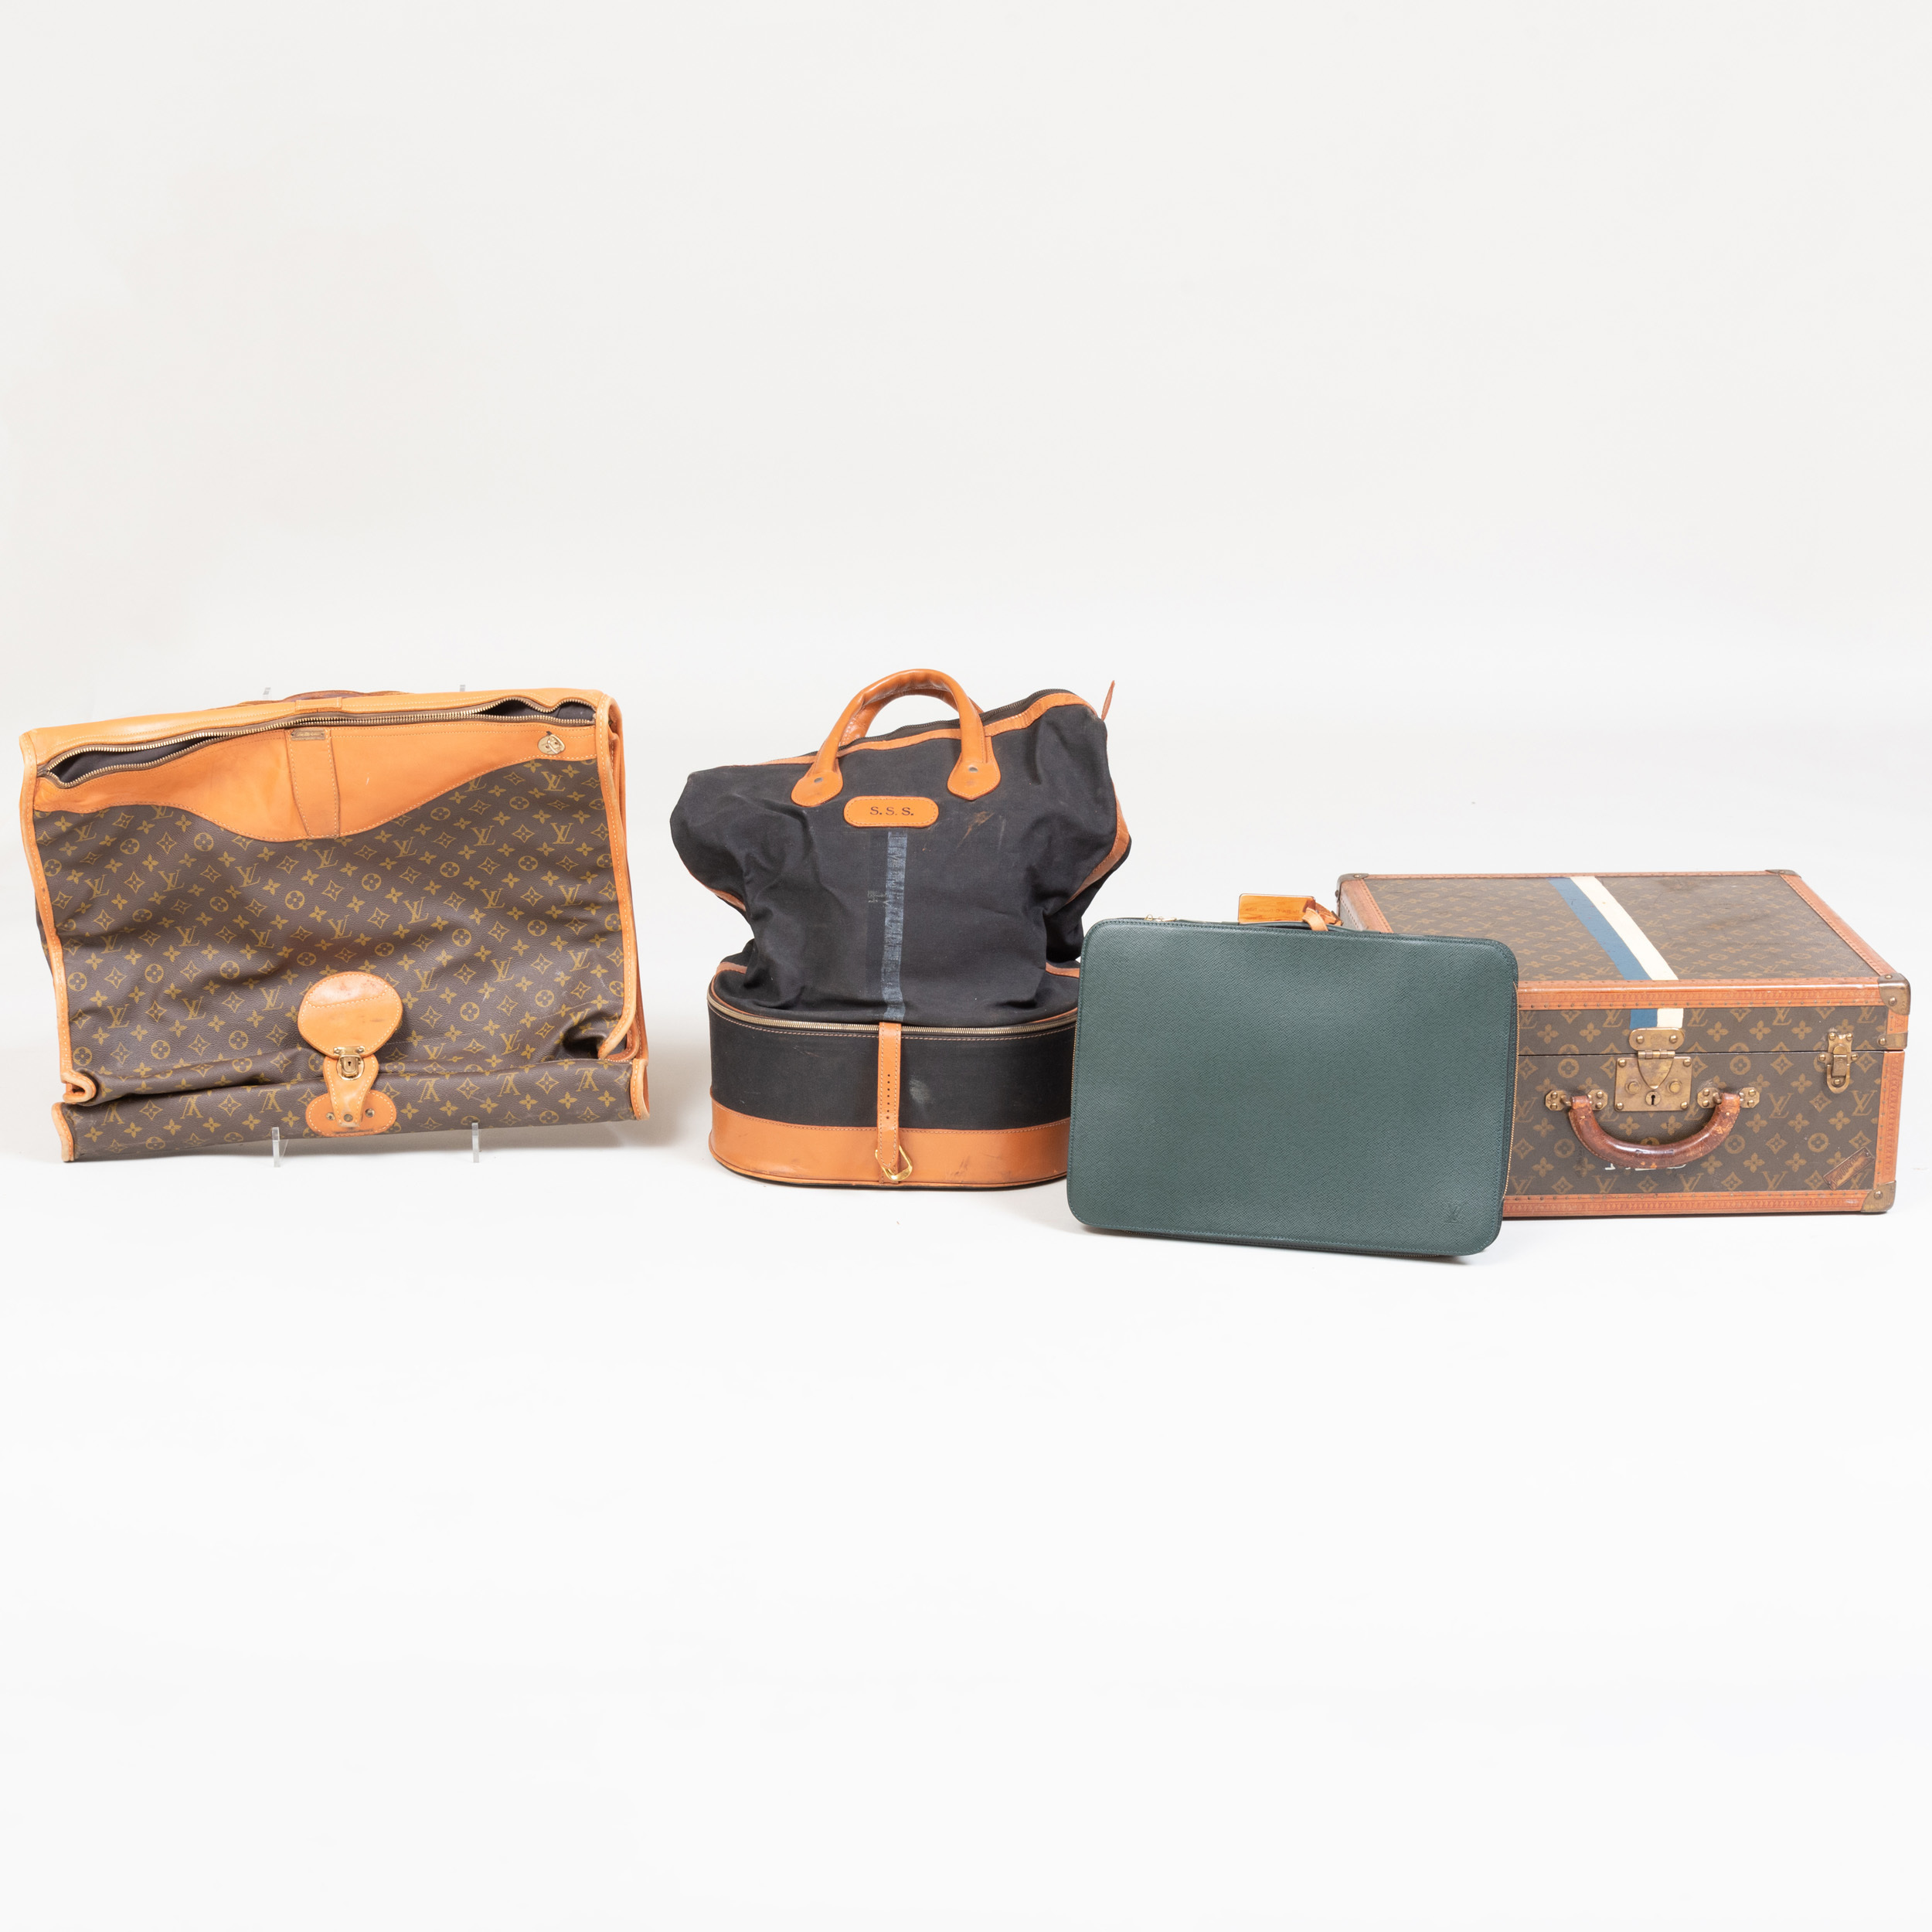 Group of Three Louis Vuitton Items | Auction House Website